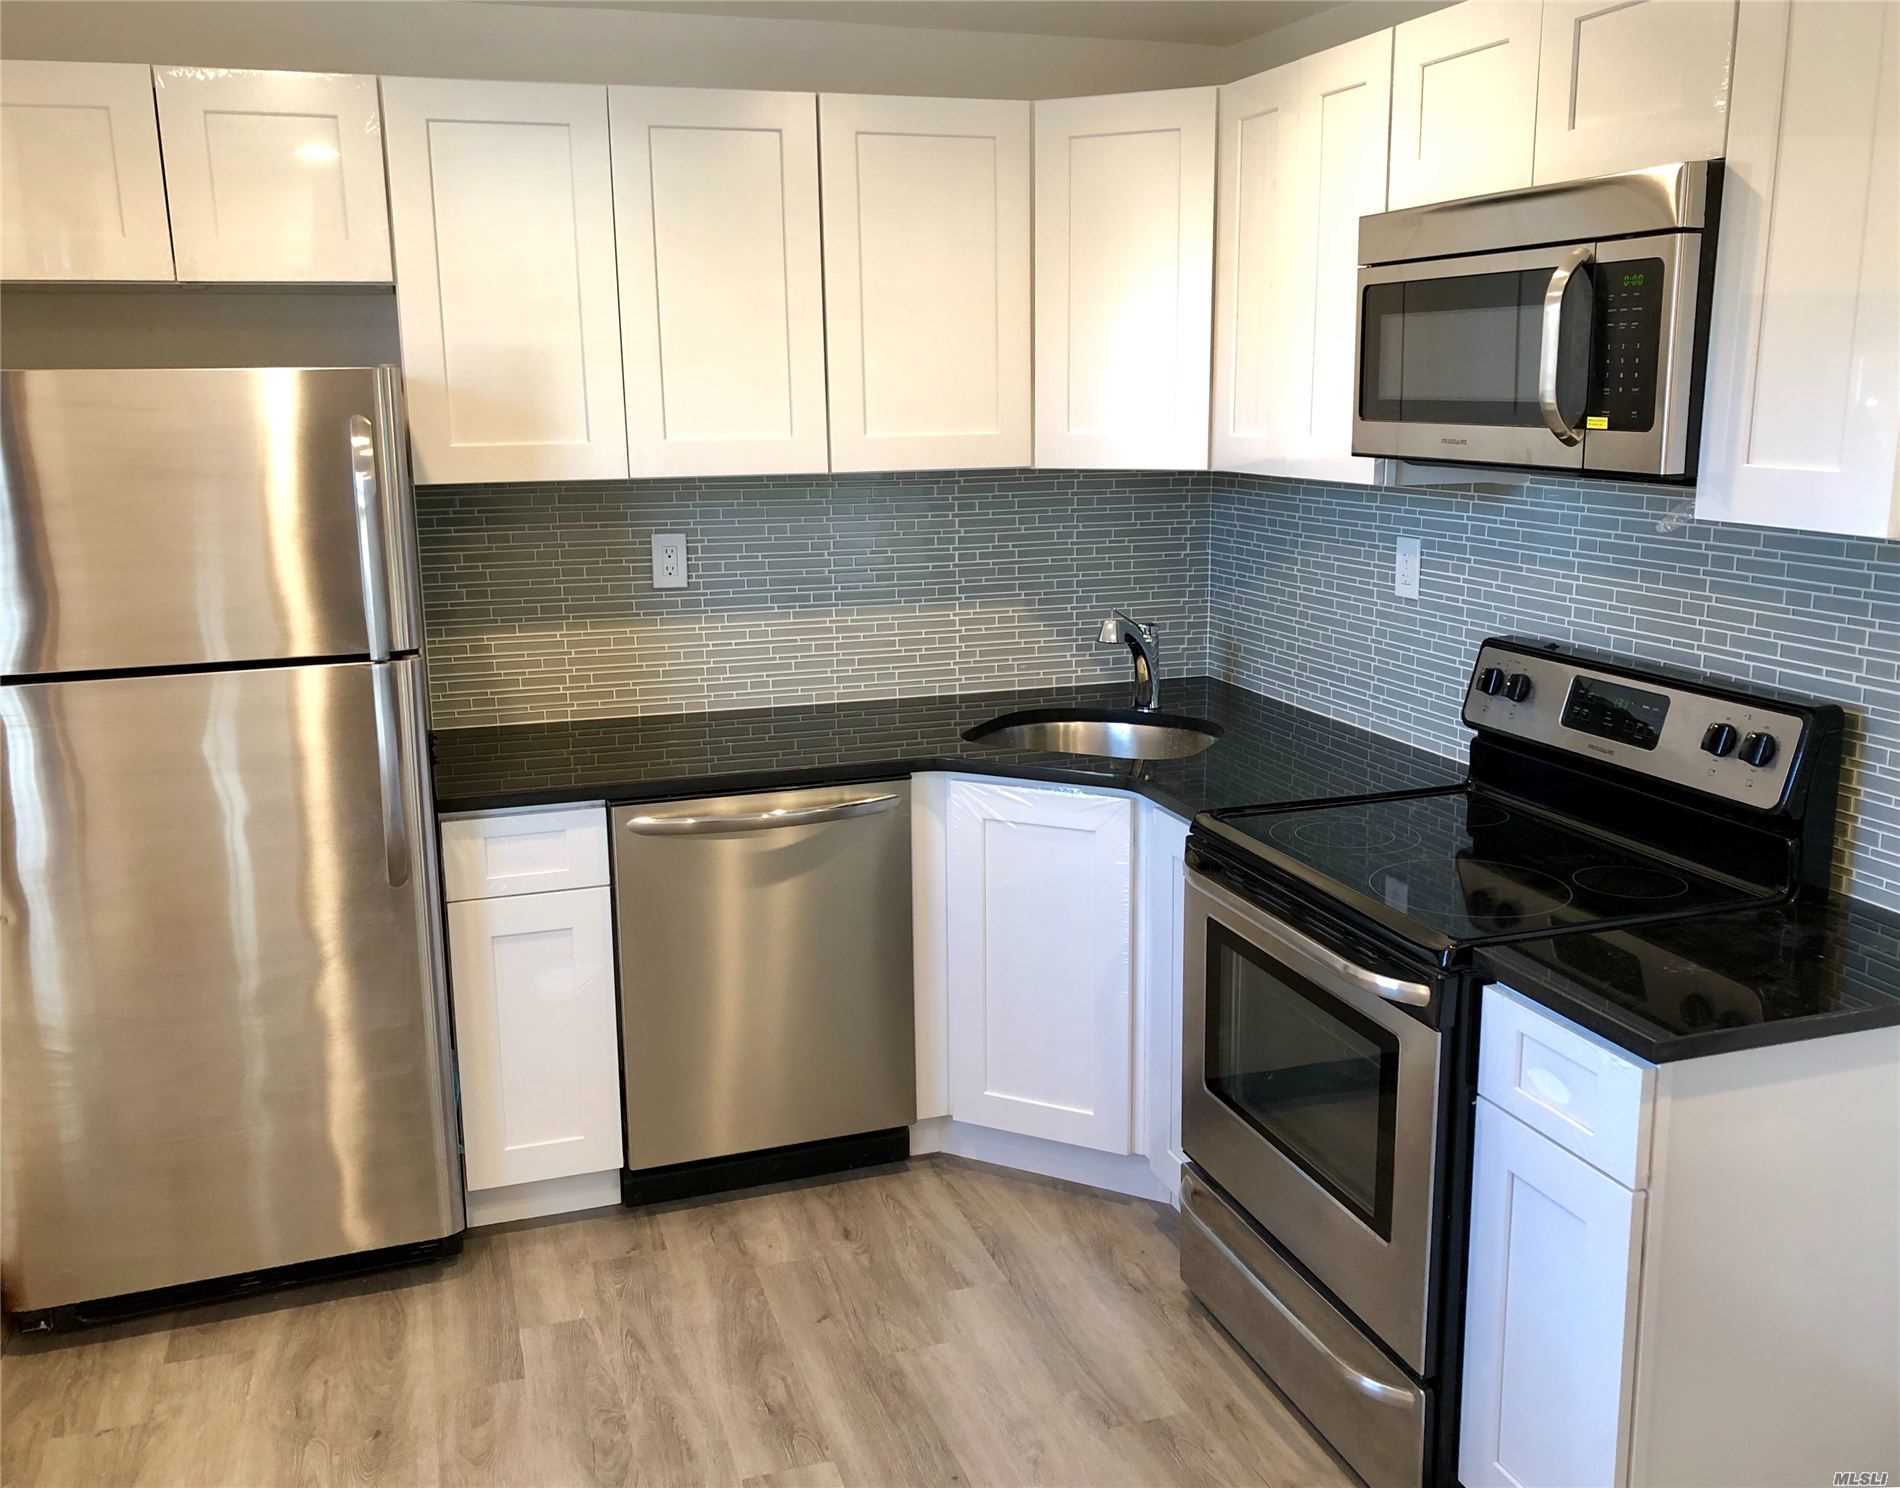 You&rsquo;ll Be So Sorry If You Miss This One! Rare Find in Syosset! Fully Renovated, Gorgeous Large Apt in Legal 2 Family, in Phenomenal Location close to LIRR, Town and All in North Syosset Village and Syosset Schools! Beautiful New Hi-End Granite EIK, Gleaming New Floors, Gorgeous New Fl Bth, , New LG Washer/Dryer, and MORE! Info deemed accurate, but not guaranteed. Prospective Tenants must independently verify all info. No offer considered accepted until formal lease is signed.